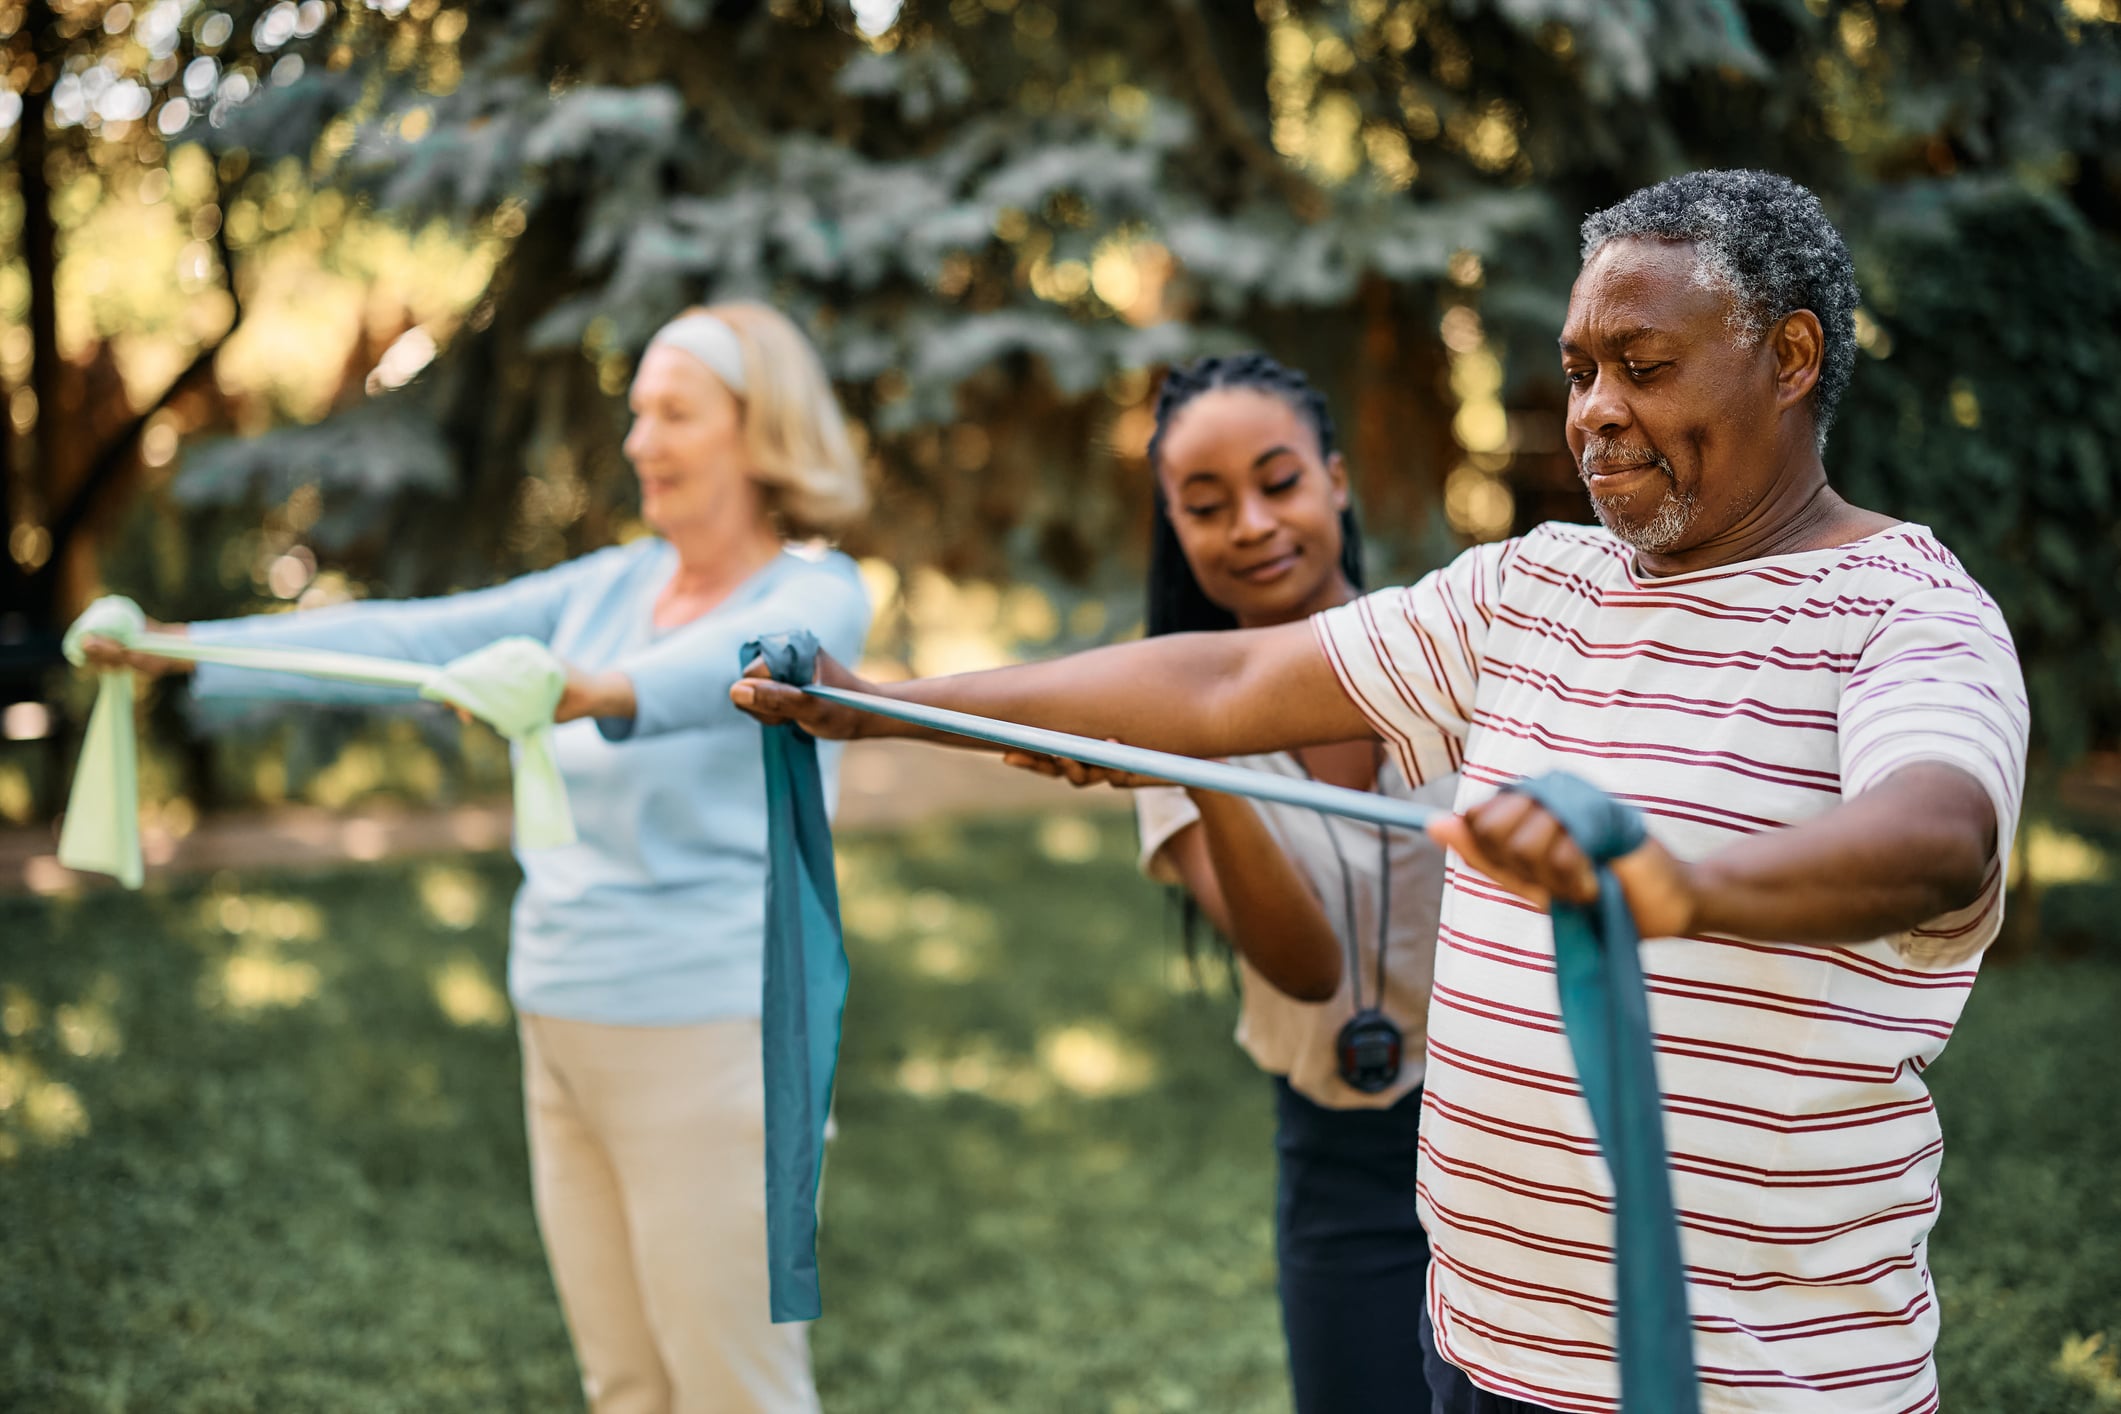 A fitness instructor helping people use exercise bands during an outdoor exercise class.